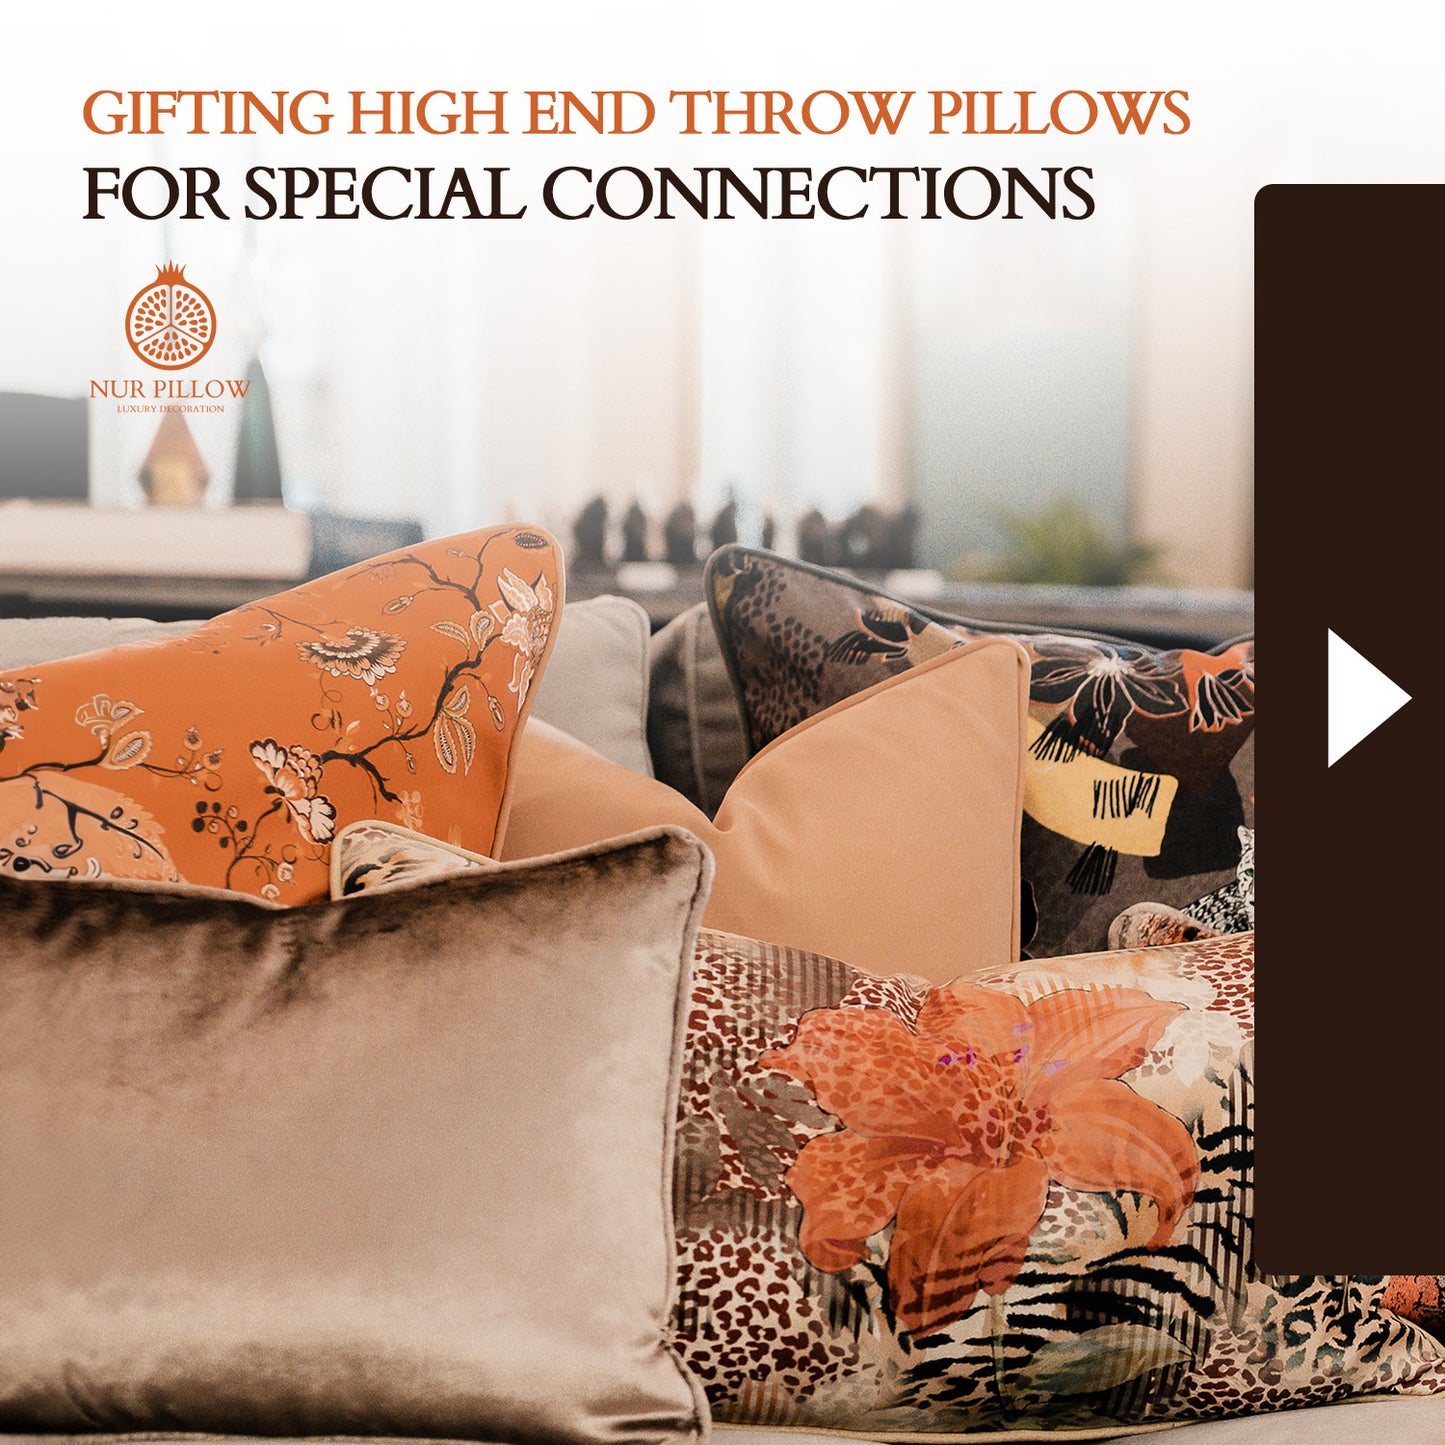 Gifting High End Throw Pillows for Special Connections